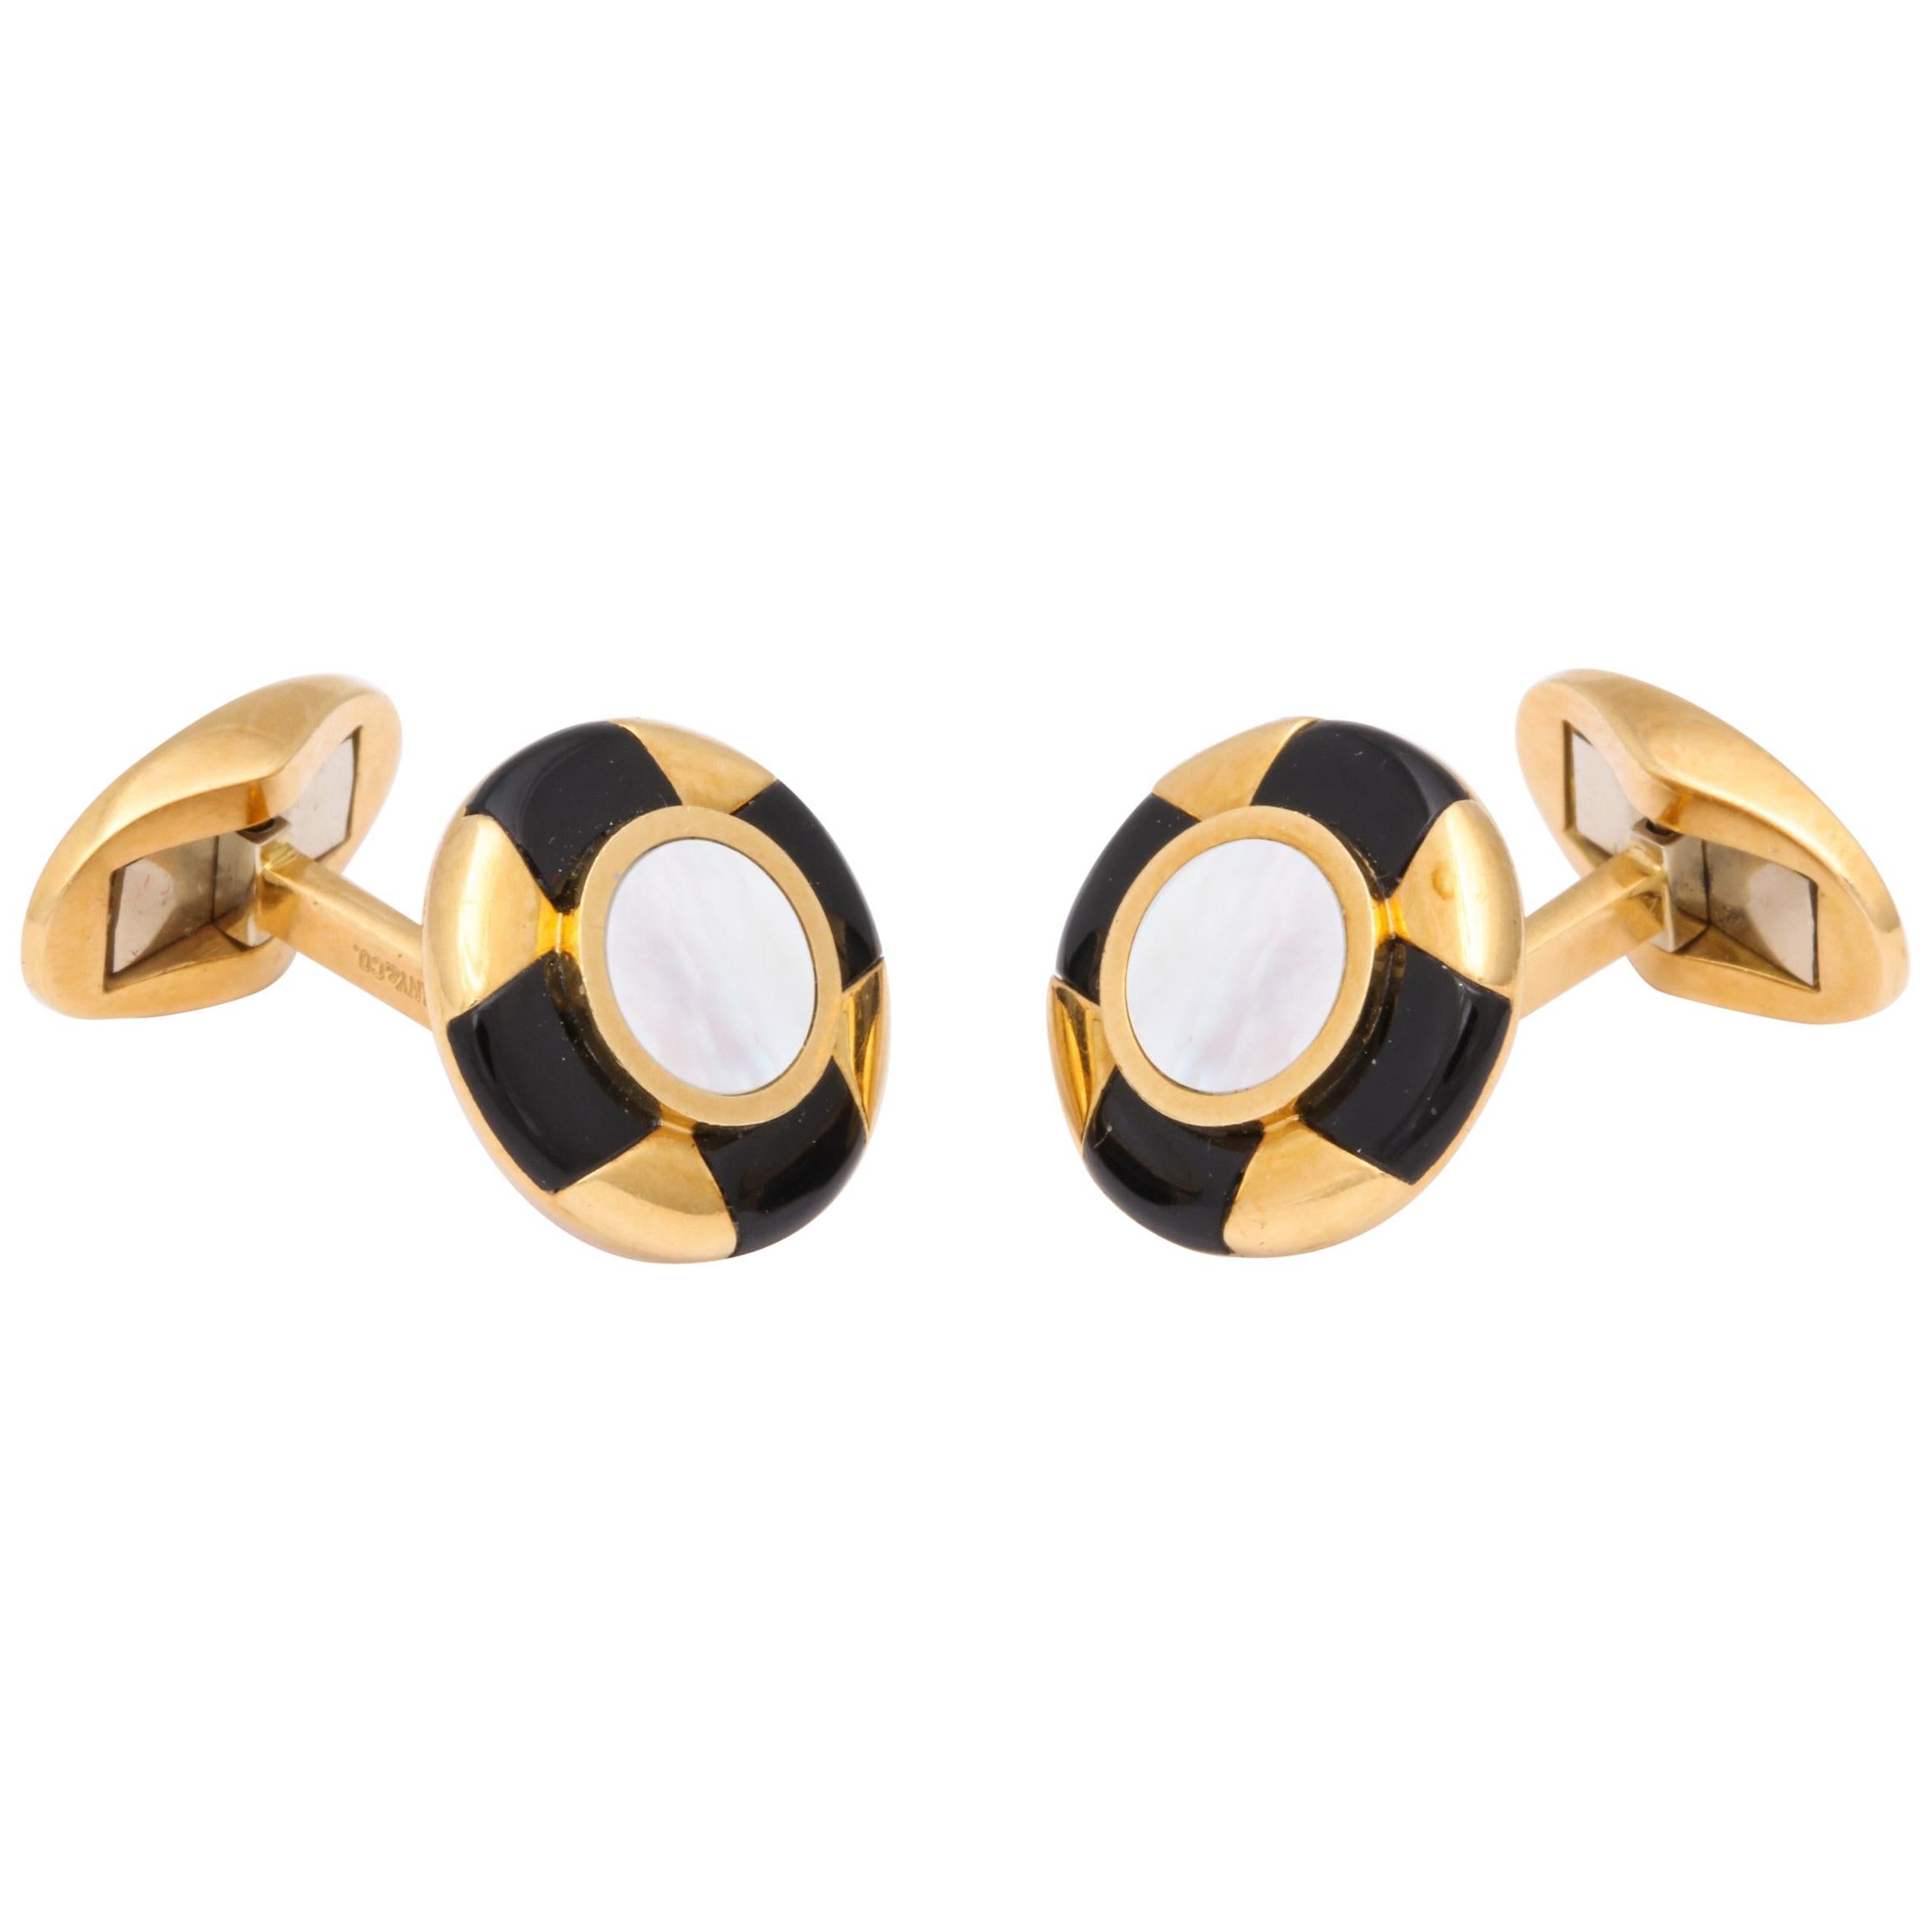 Tiffany & Co. Germany 1980s Mother of Pearl and Onyx Gold Flip Up Cufflinks